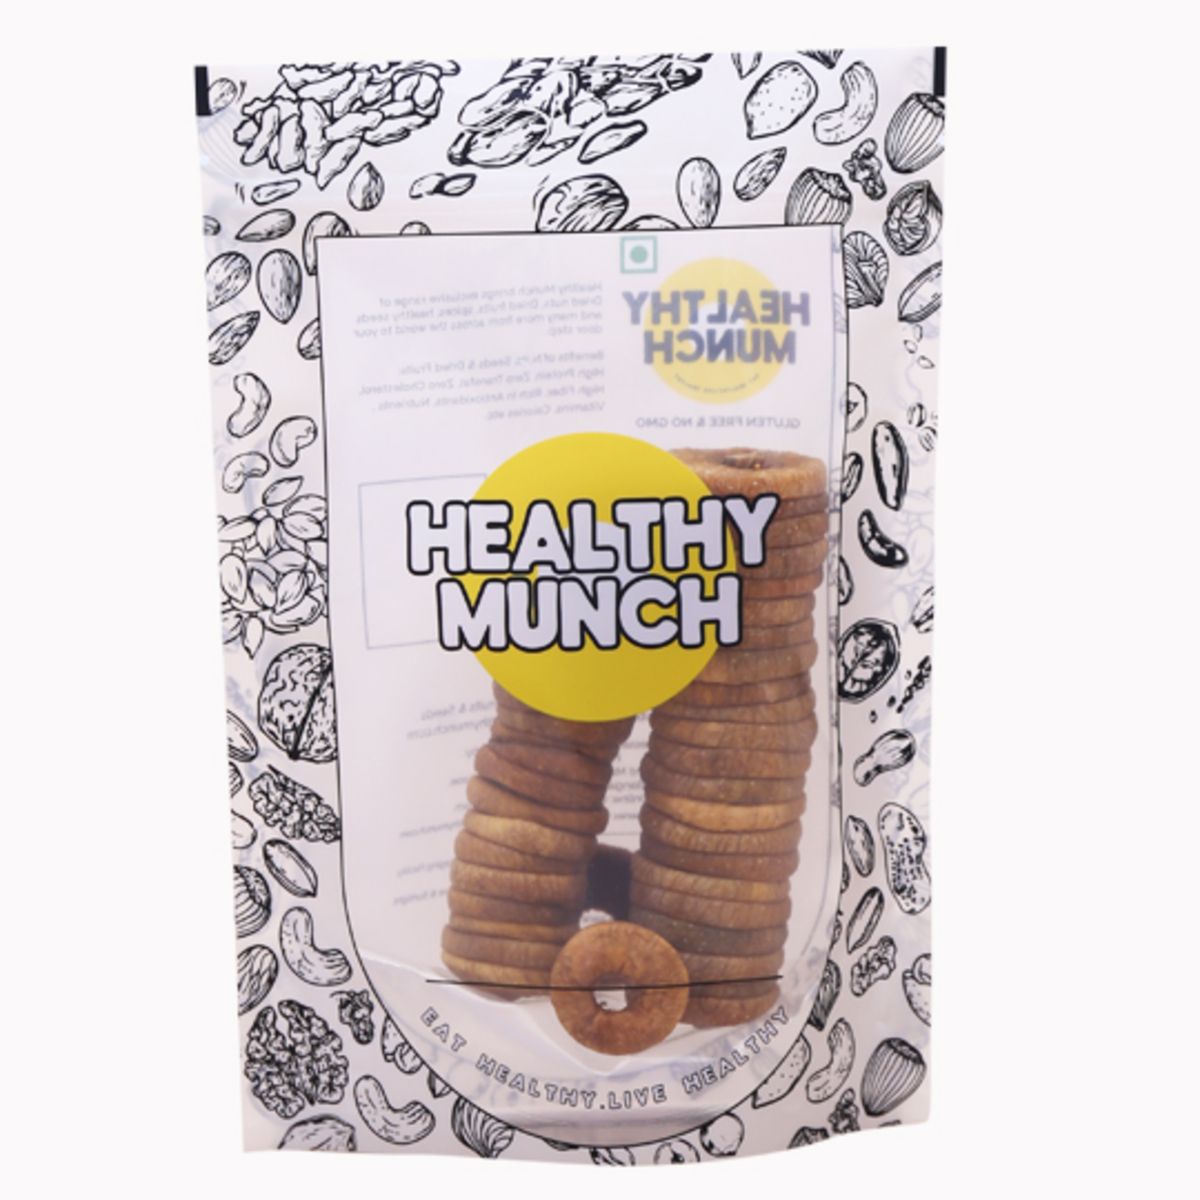 Buy Healthy Munch Dried Figs 250 gms at Best Price Online